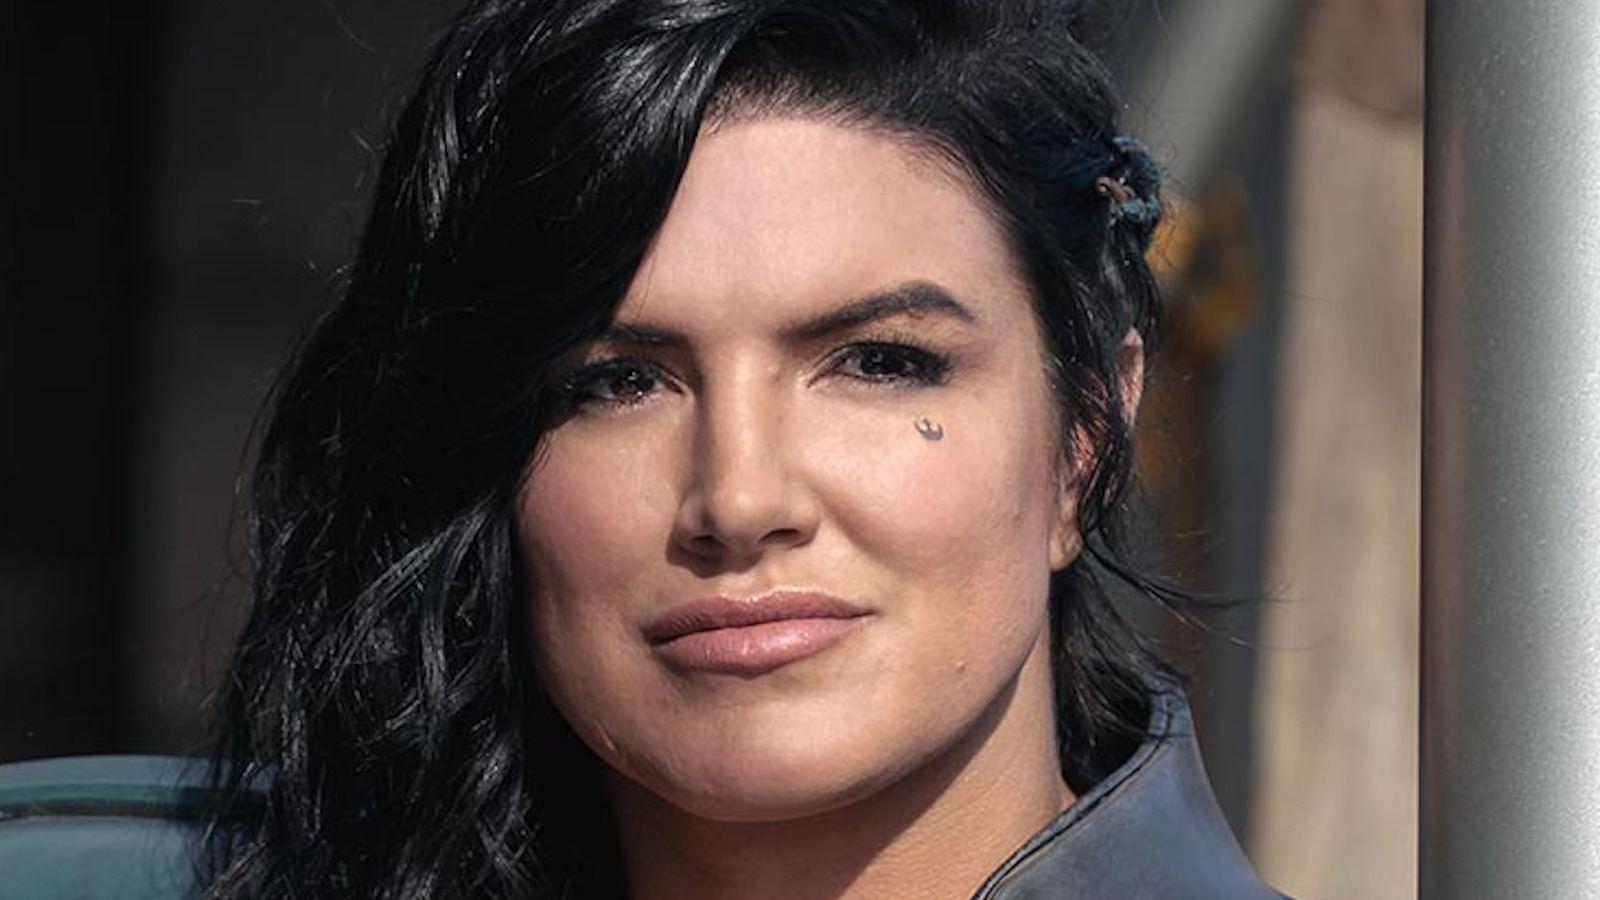 Here's Why Gina Carano Was Fired From The Mandalorian.